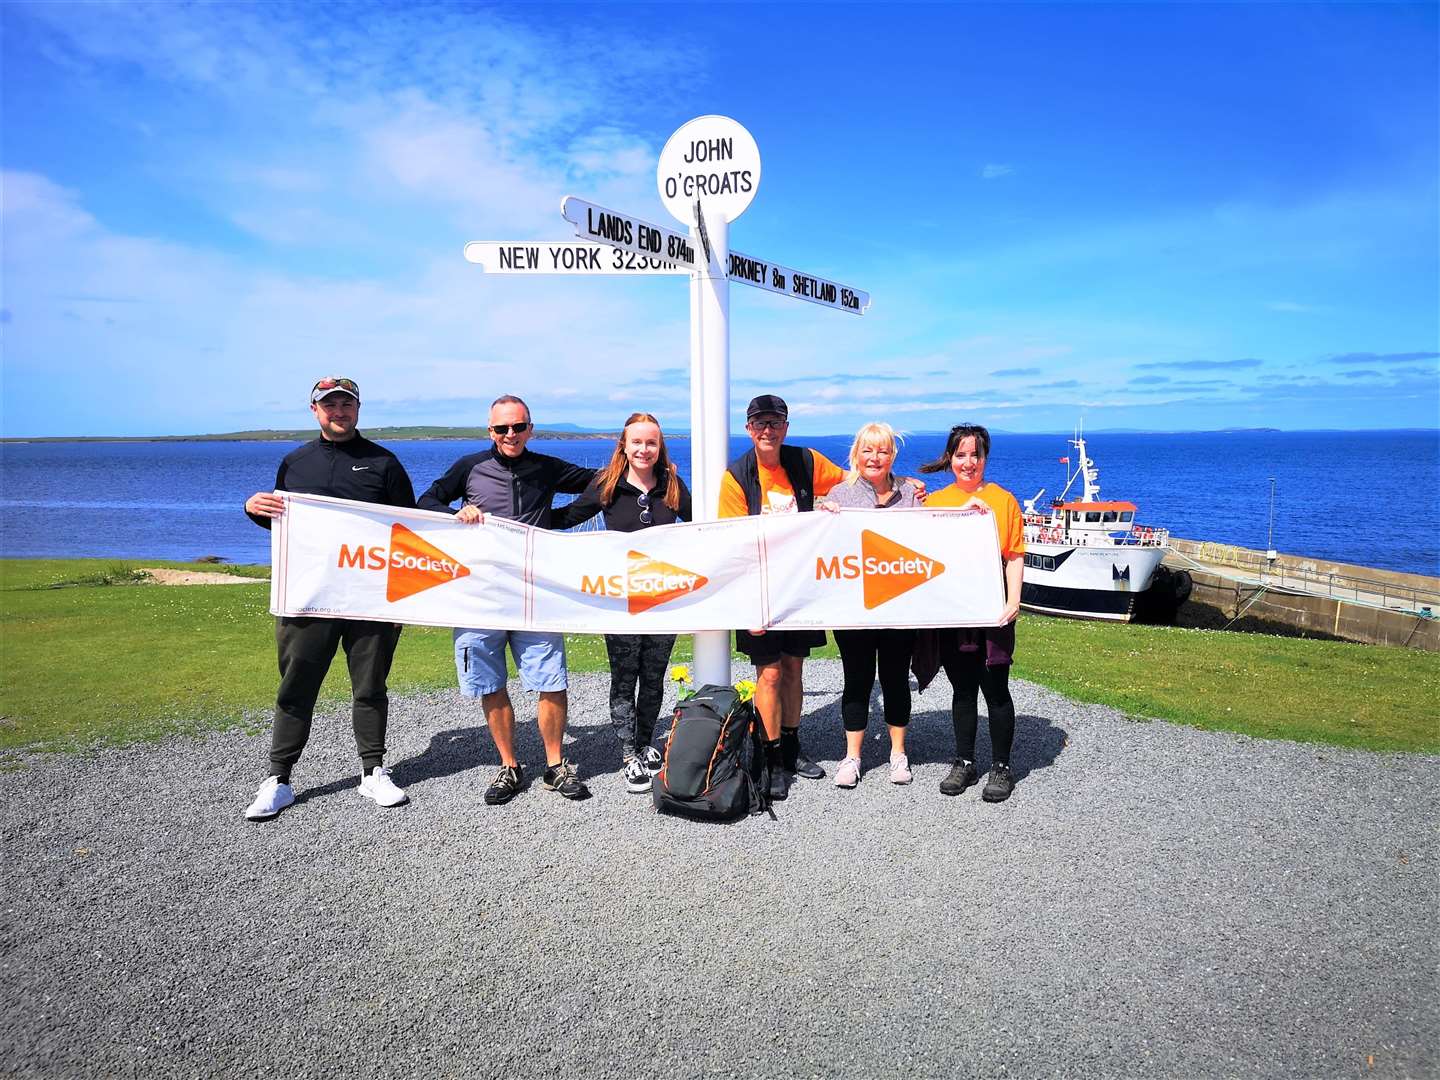 Gary Rushworth was surprised to be greeted by some of his family on his arrival at John O'Groats.